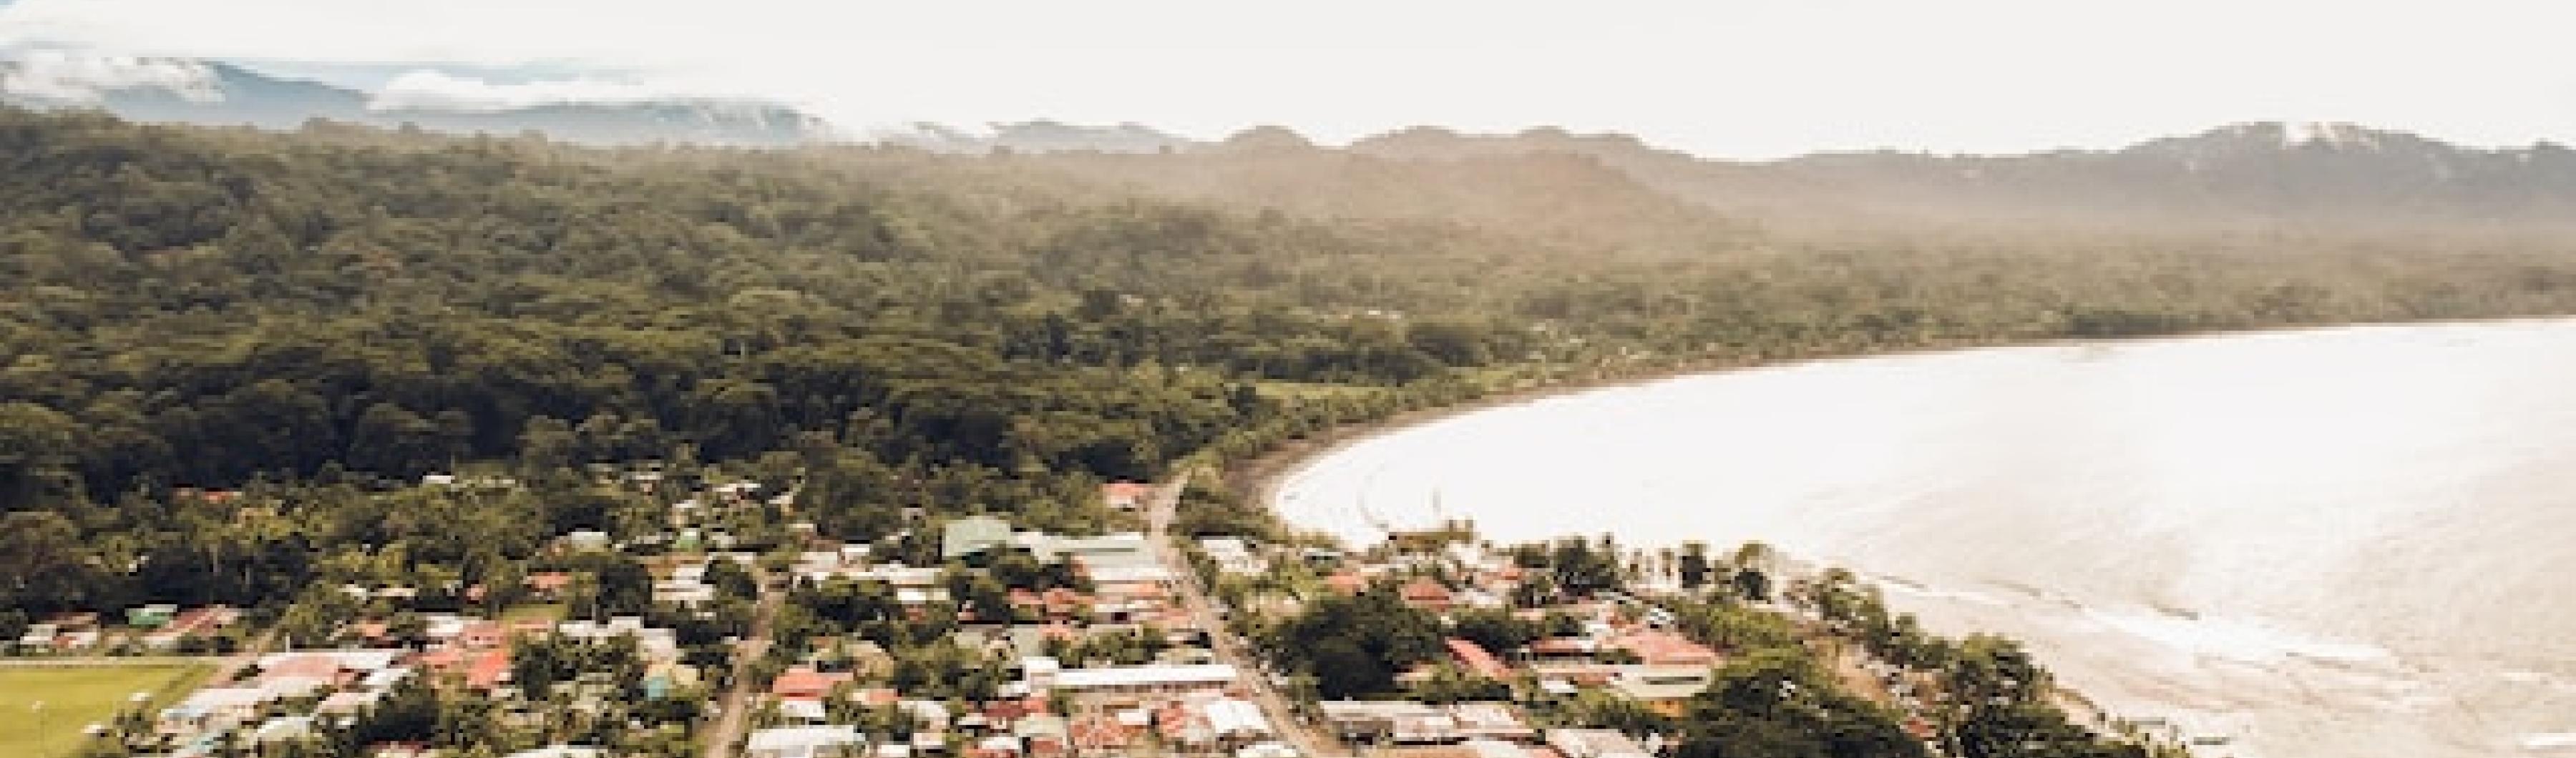 a view of a coastal town in costa rica